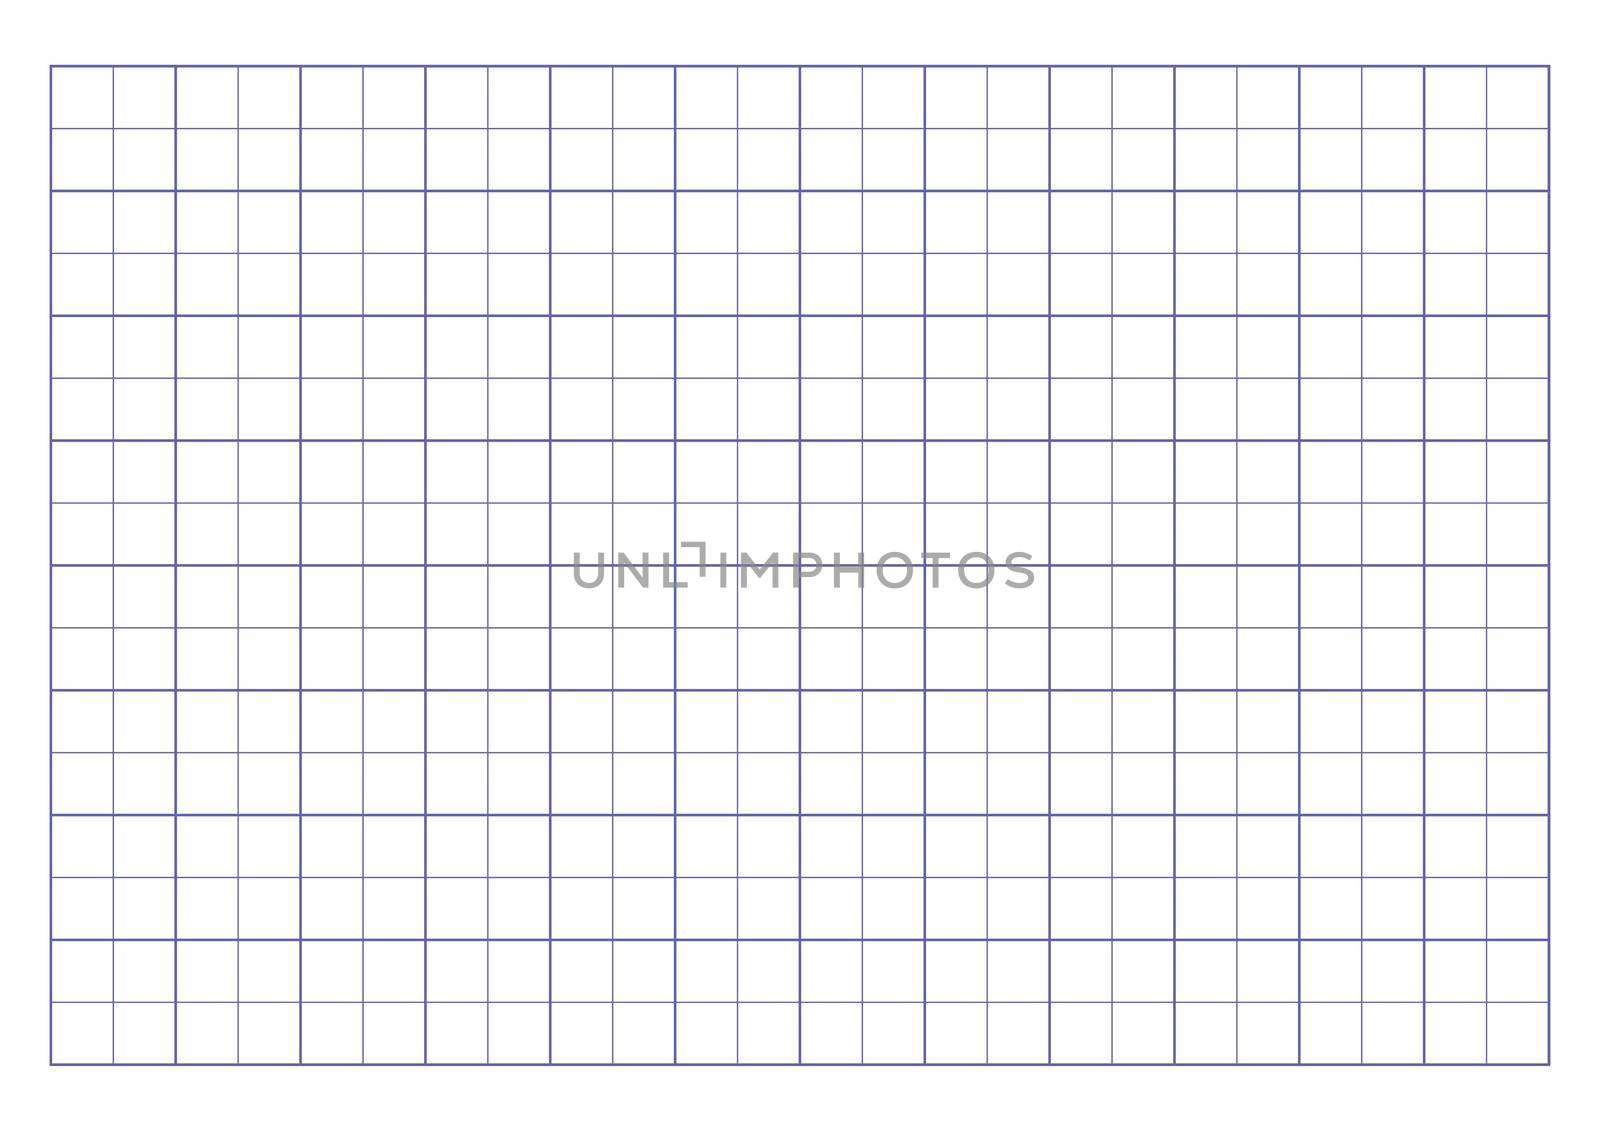 Millimeter graph paper grid. Abstract squared background. Geometric pattern for school, technical engineering line scale measurement. Lined blank for education isolated on transparent background by allaku